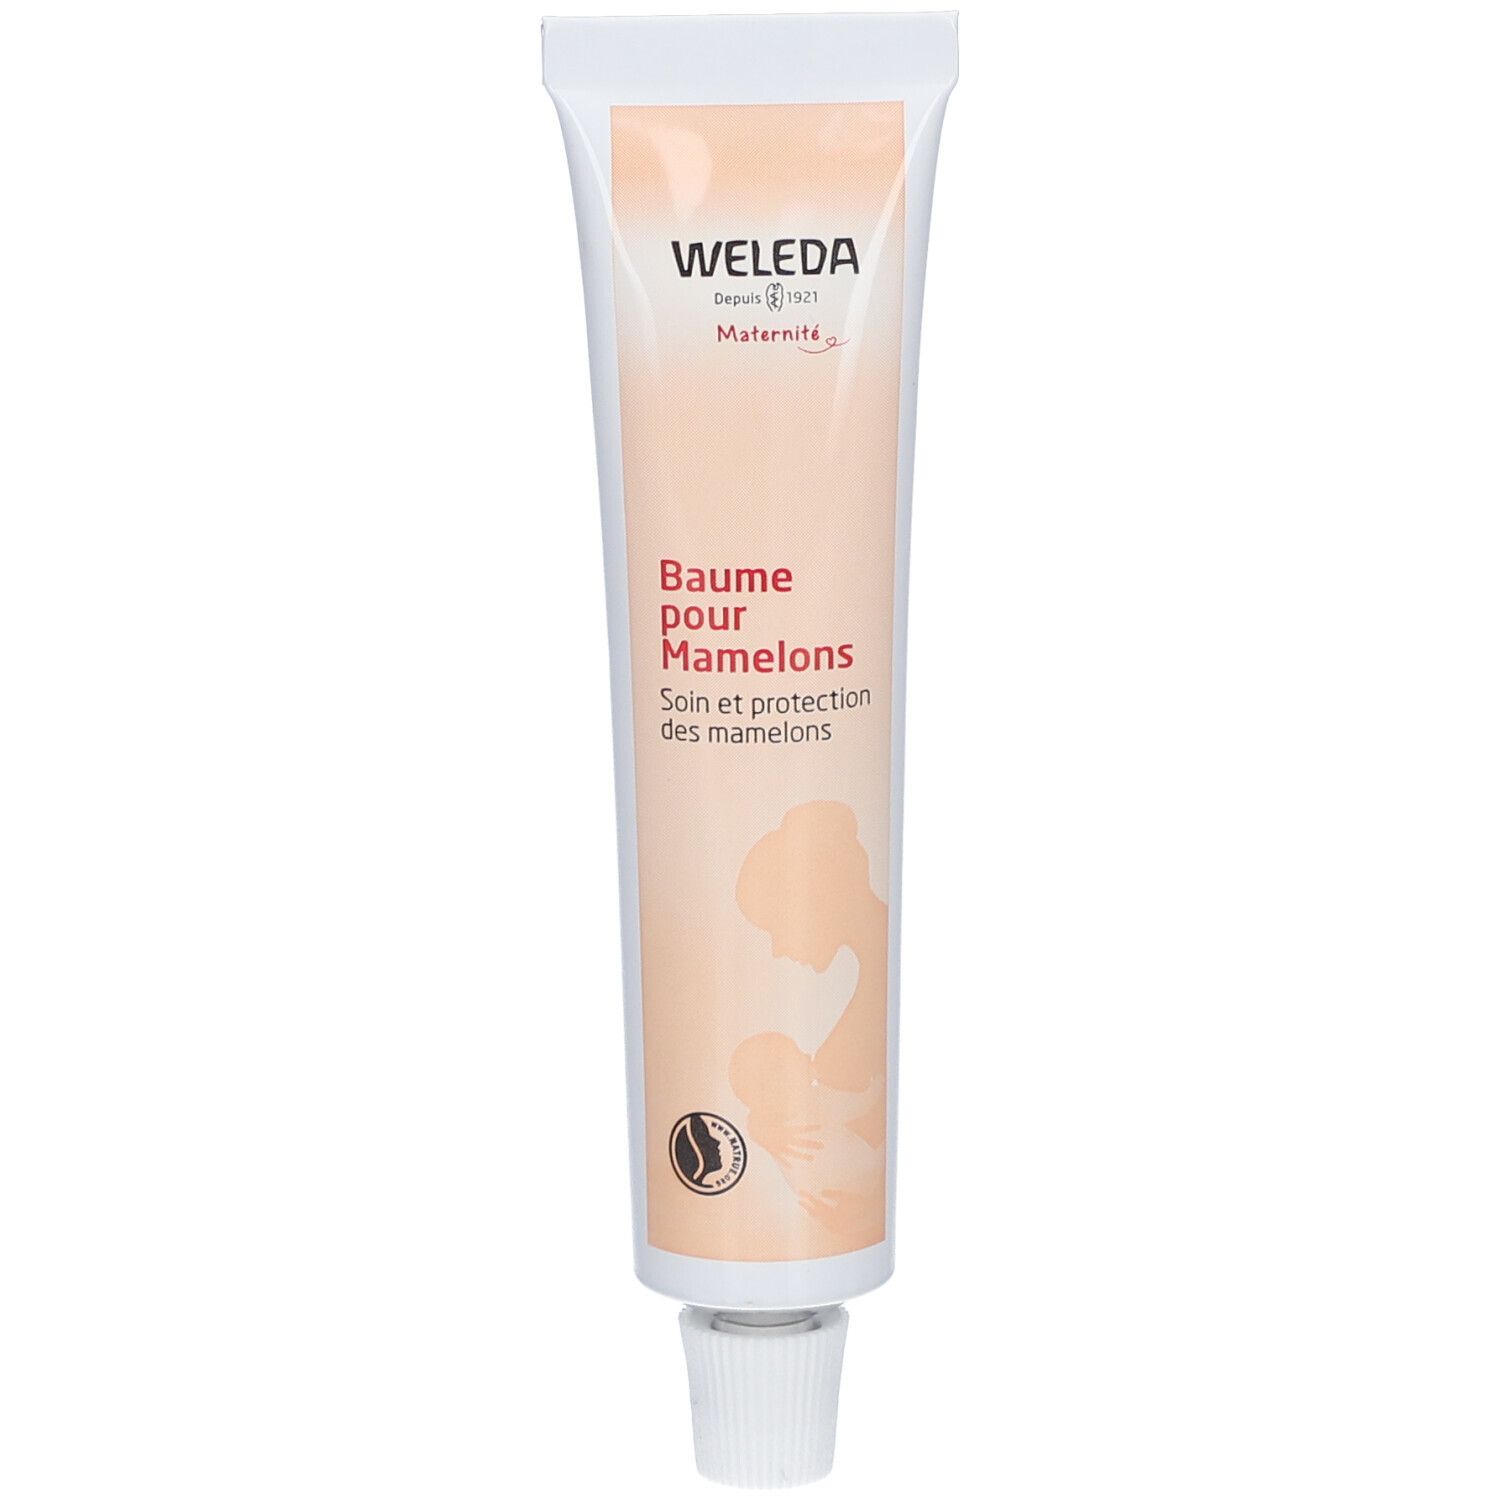 Weleda Baume pour Mamelons